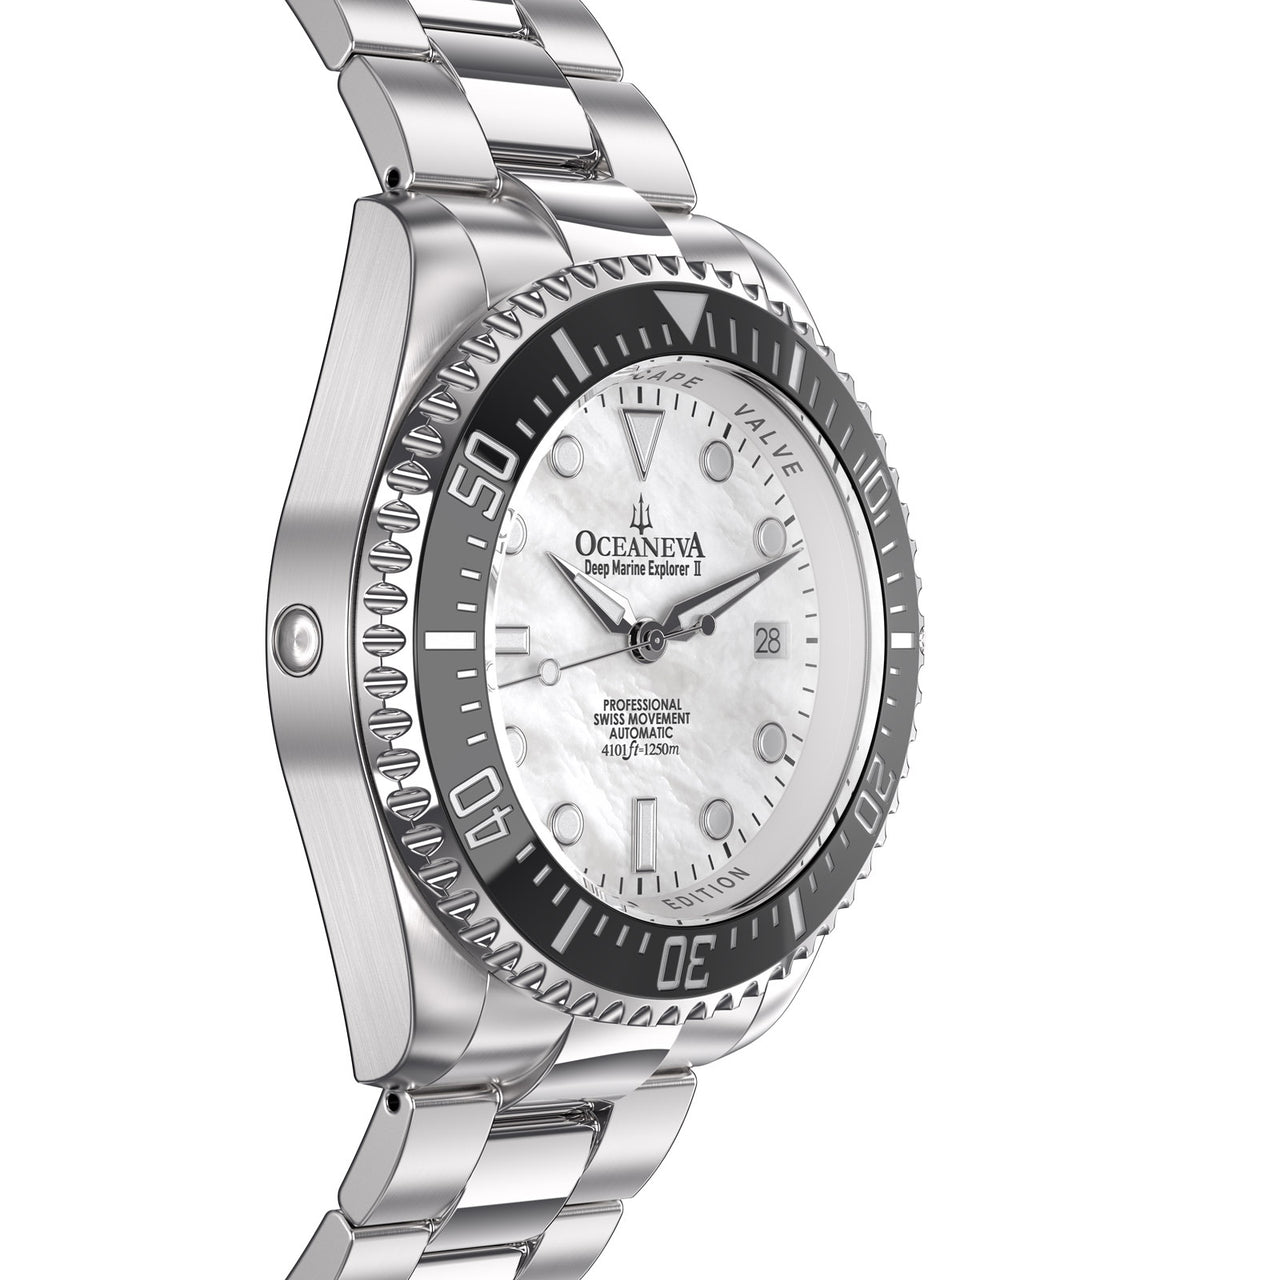 Oceaneva 1250M Dive Watch White Mother Of Pearl Side Helium Escape Valve View